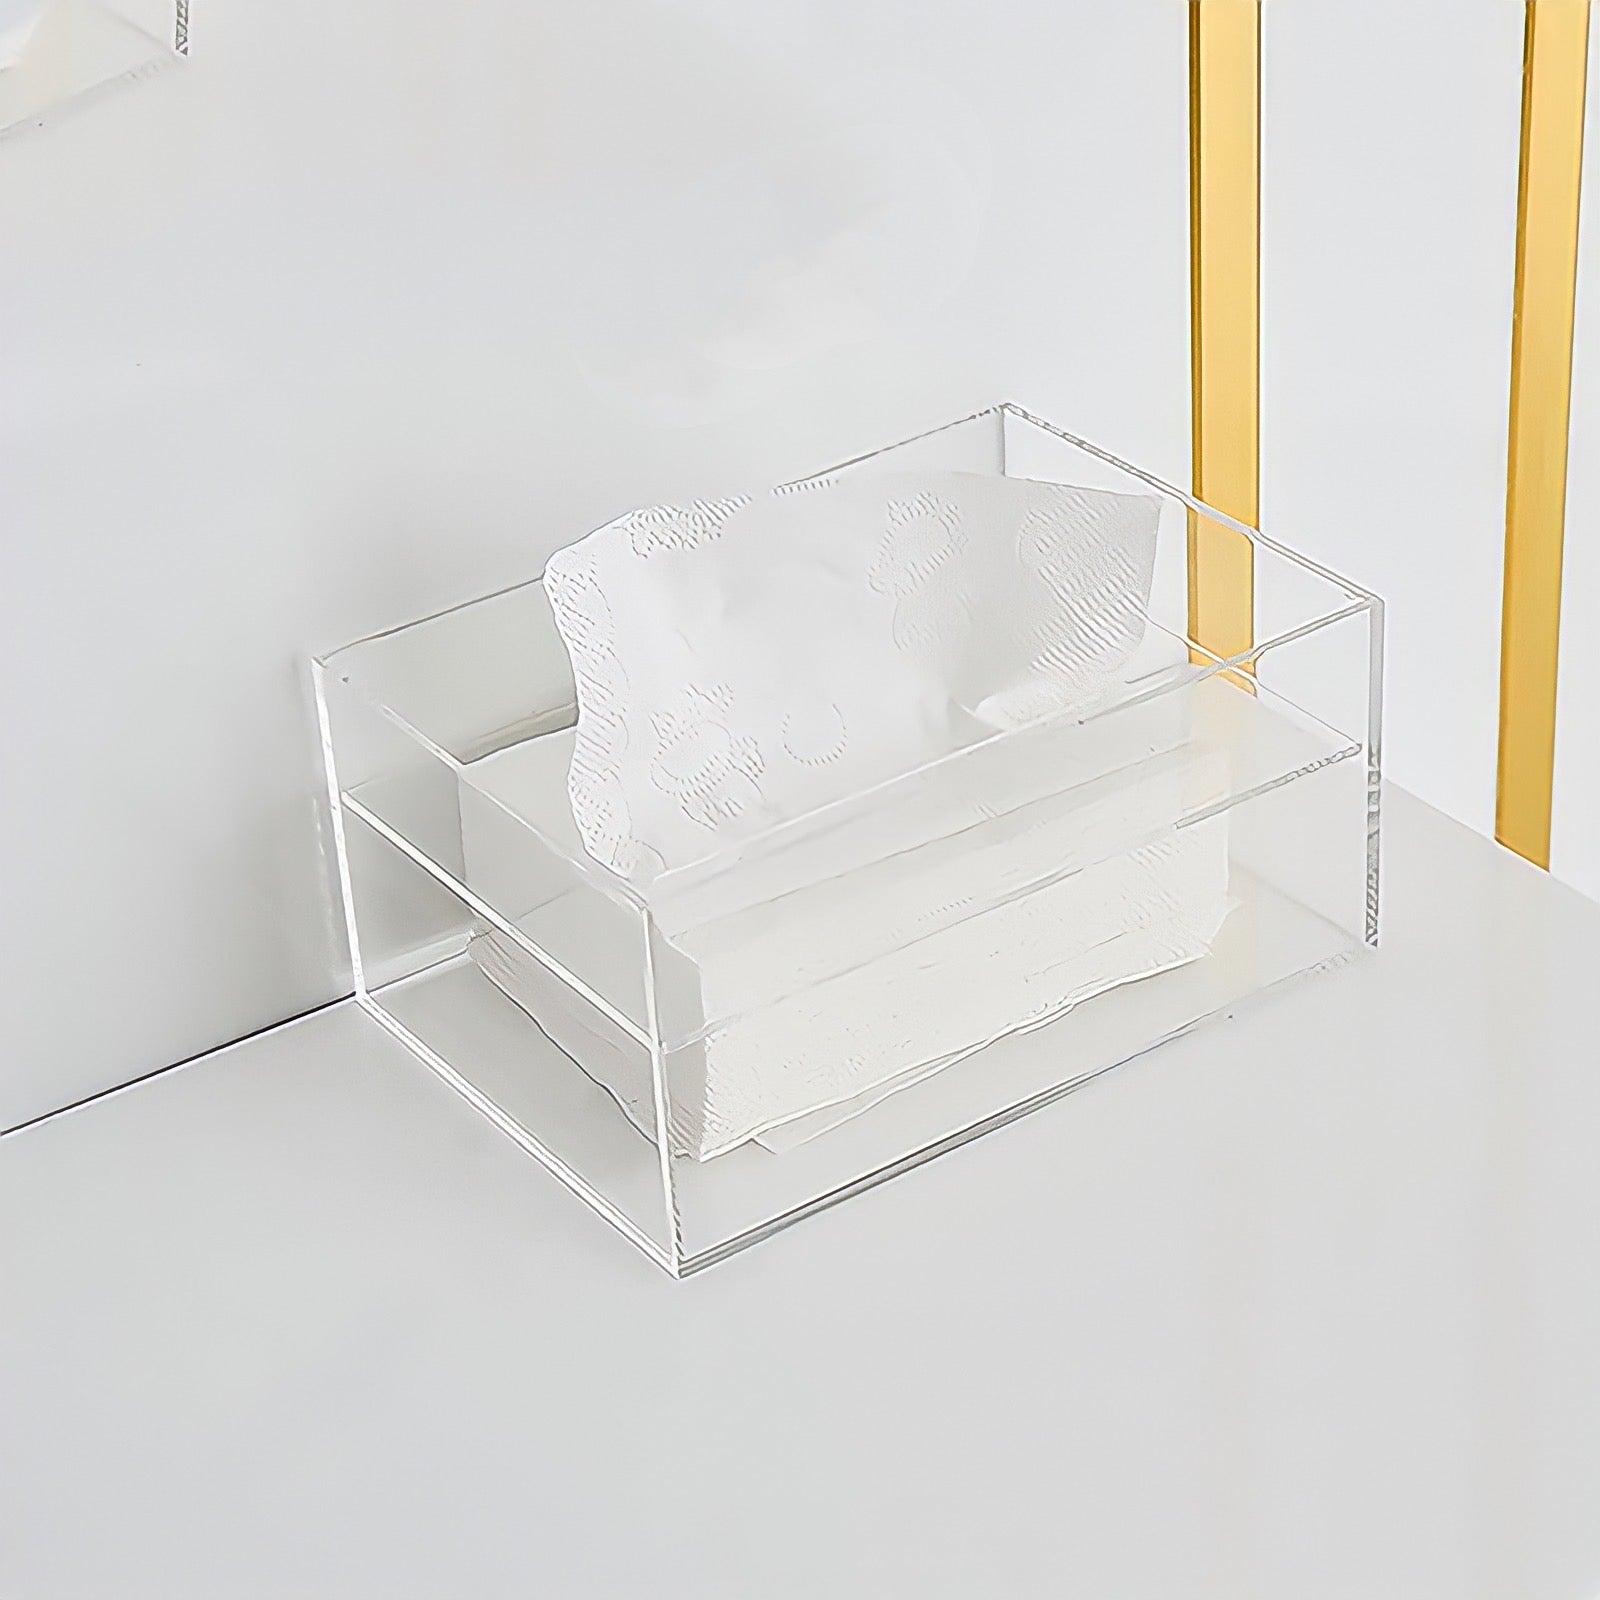 COLORBOX ACRYLIC TISSUE BOX DECORATIVE OBJECT - Lunee Home